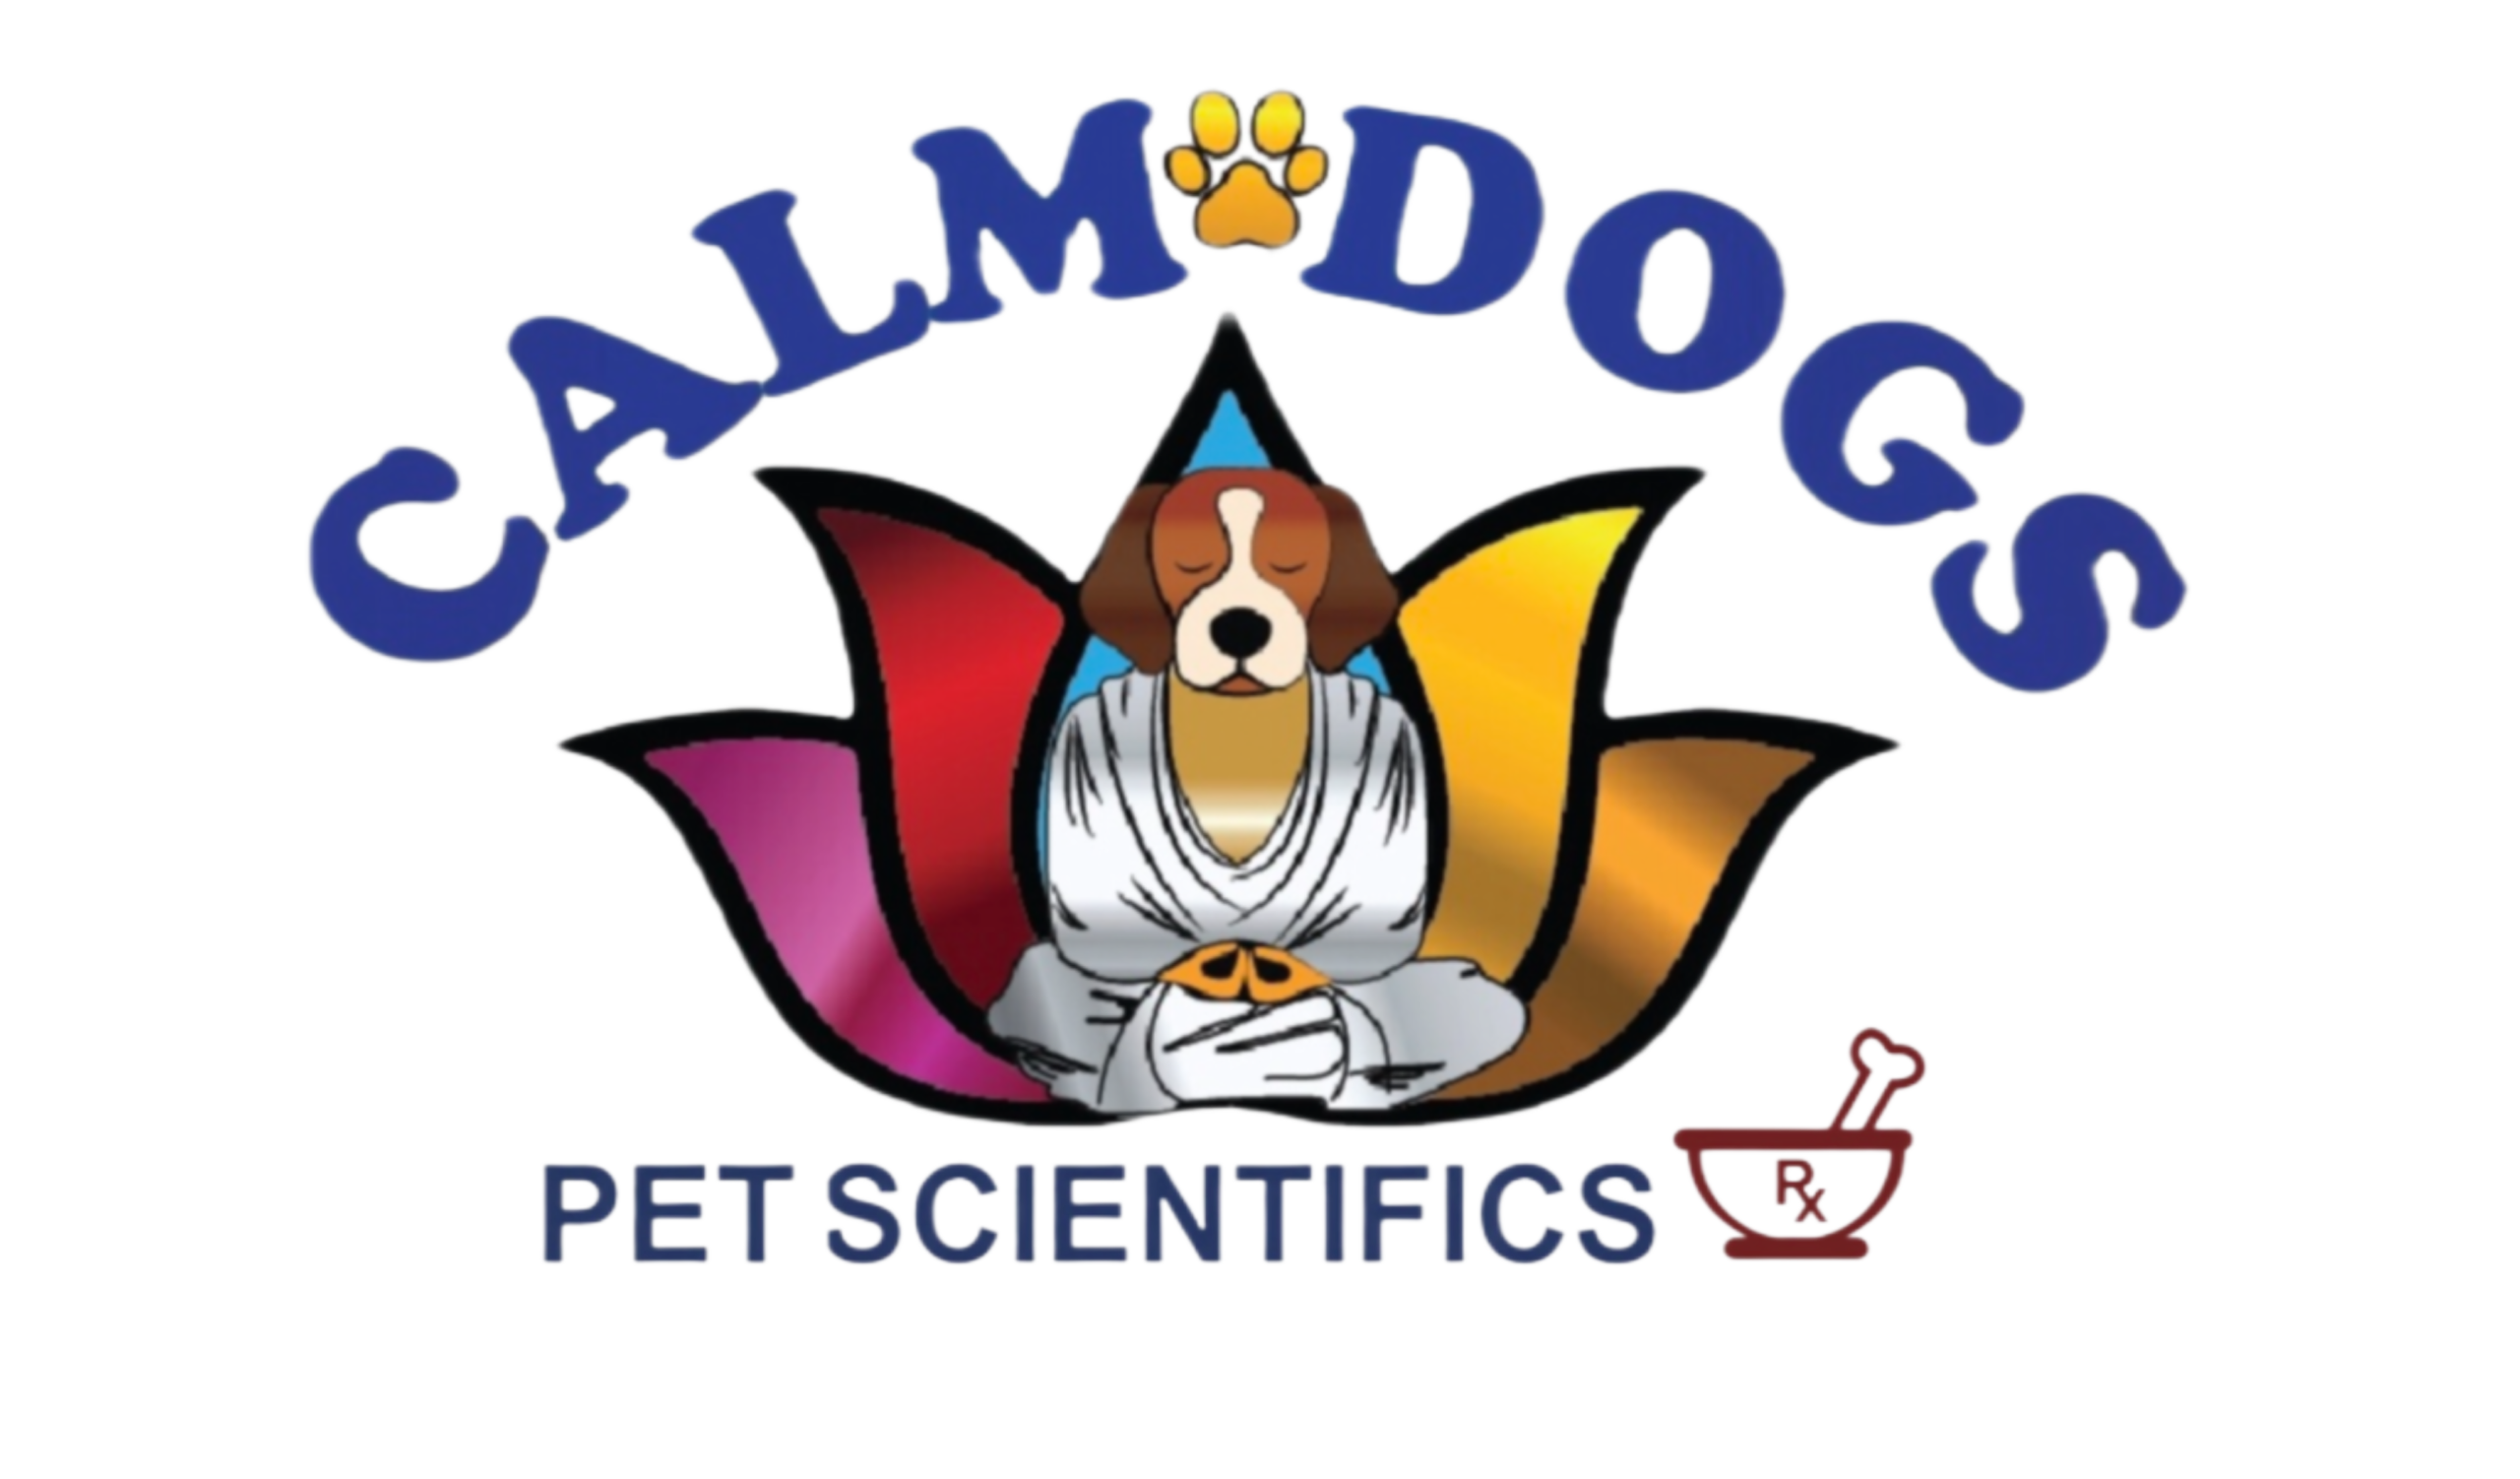 CALM DOGS® "The World's Best Dog Anxiety Calming Aid"